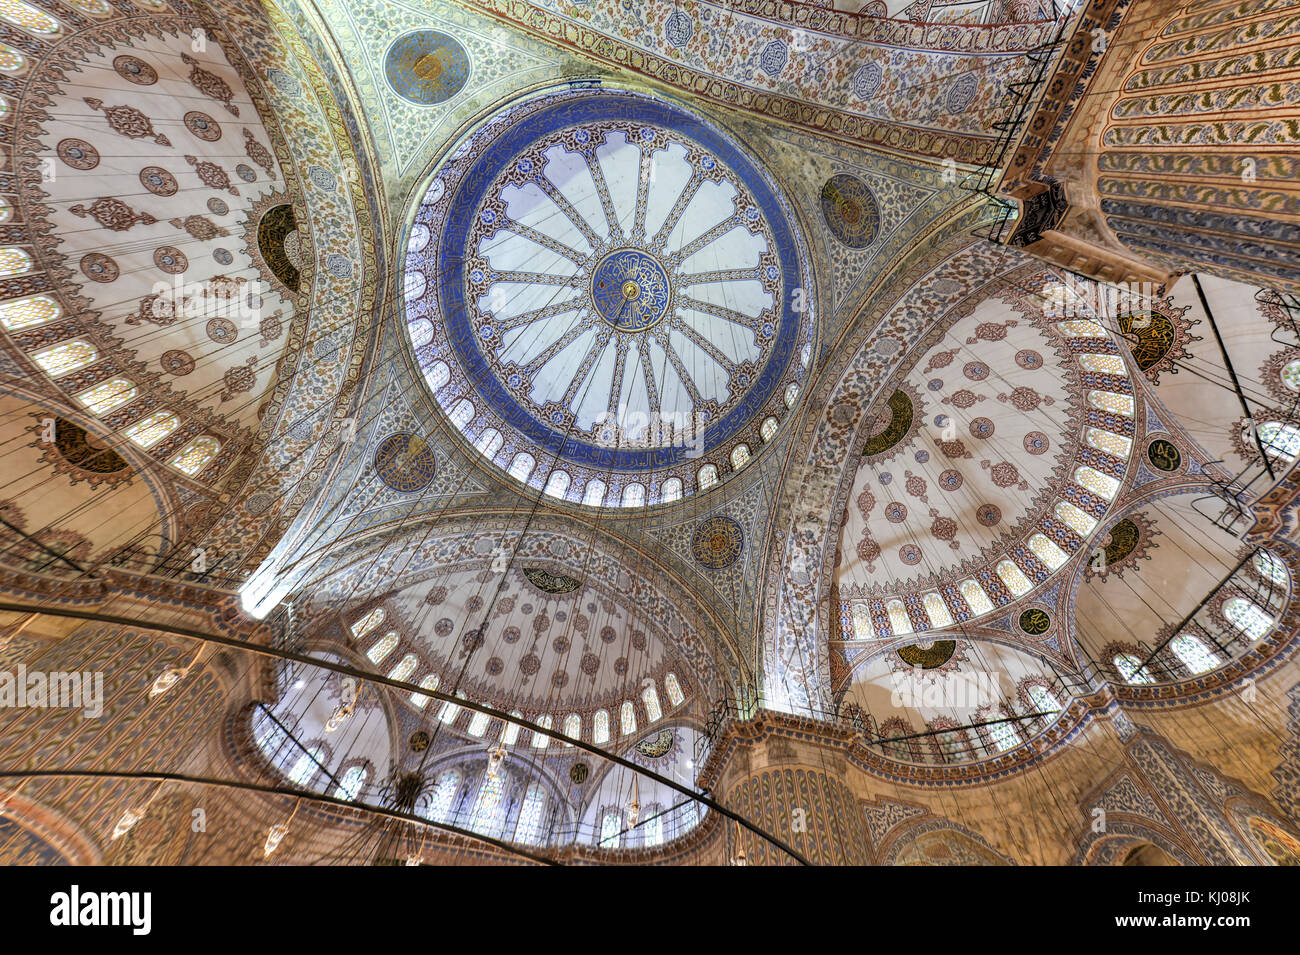 ISTANBUL, TURKEY - DECEMBER 2, 2014: Blue Mosque intricate ceiling in Istanbul. Also know as the Sultan Ahmed Mosque, it is a historic mosque in Istan Stock Photo